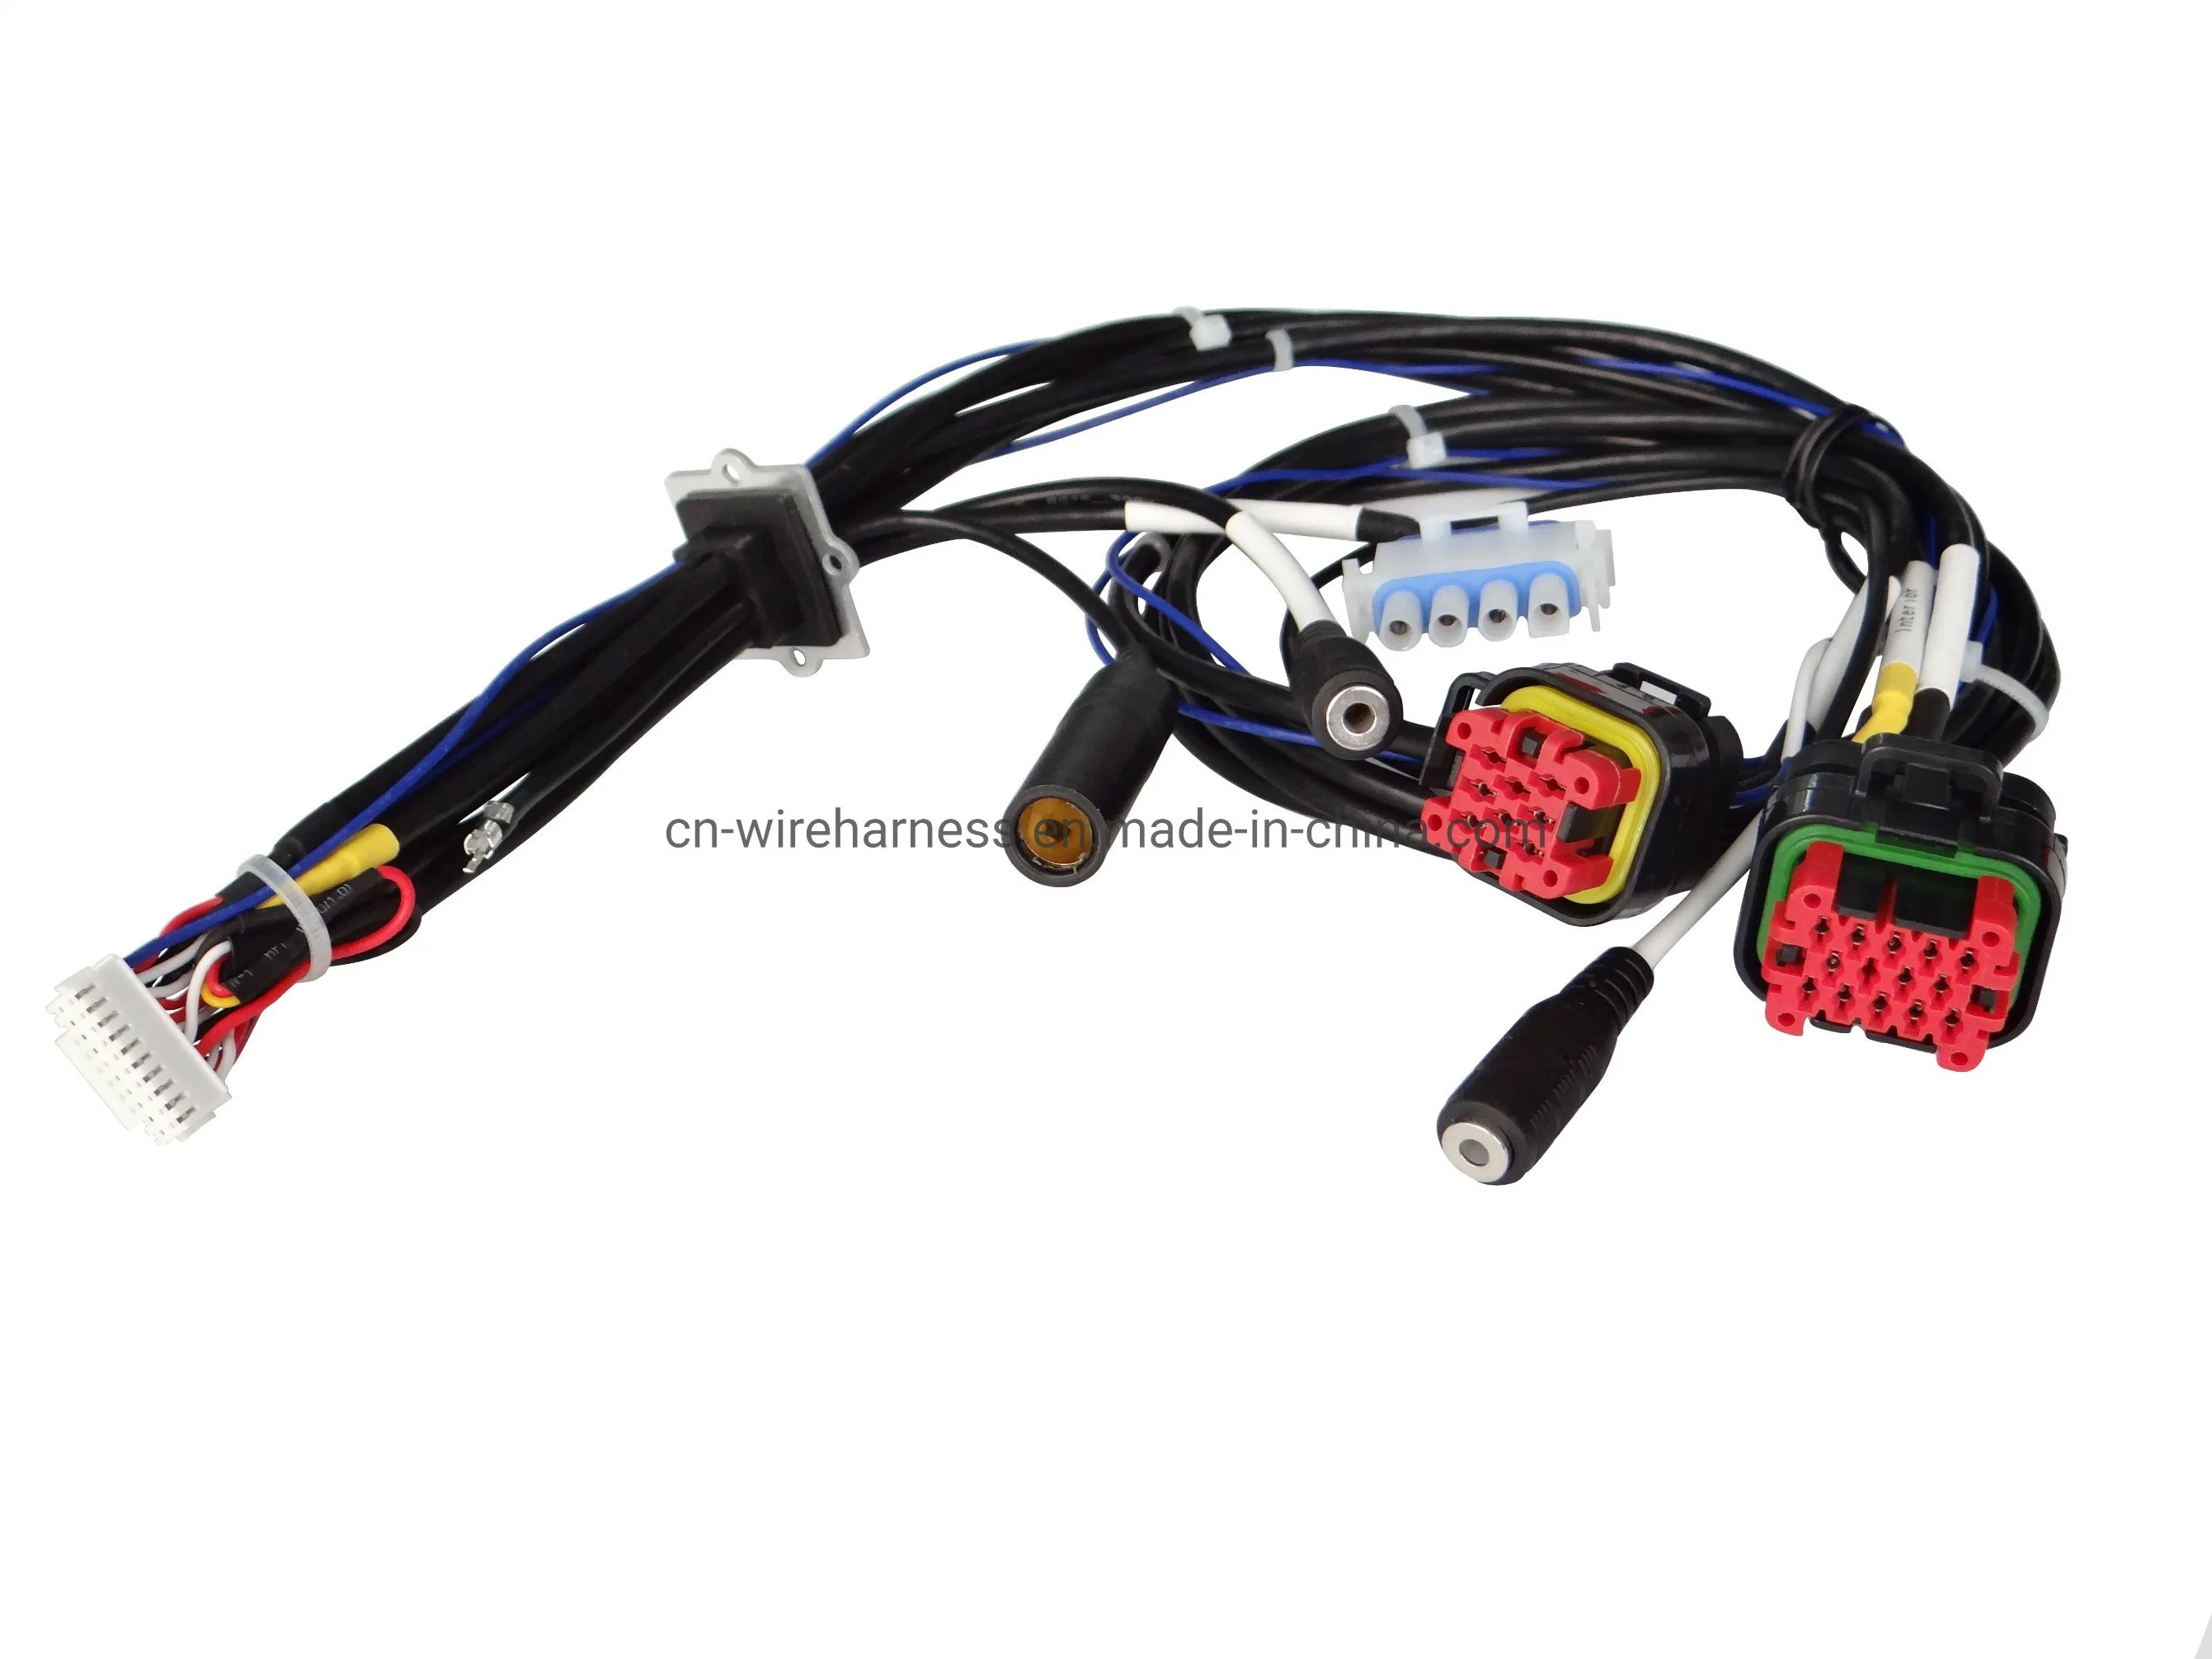 Customized Car Audio Electronic Delphi Connector Wiring Harness for Different Audio